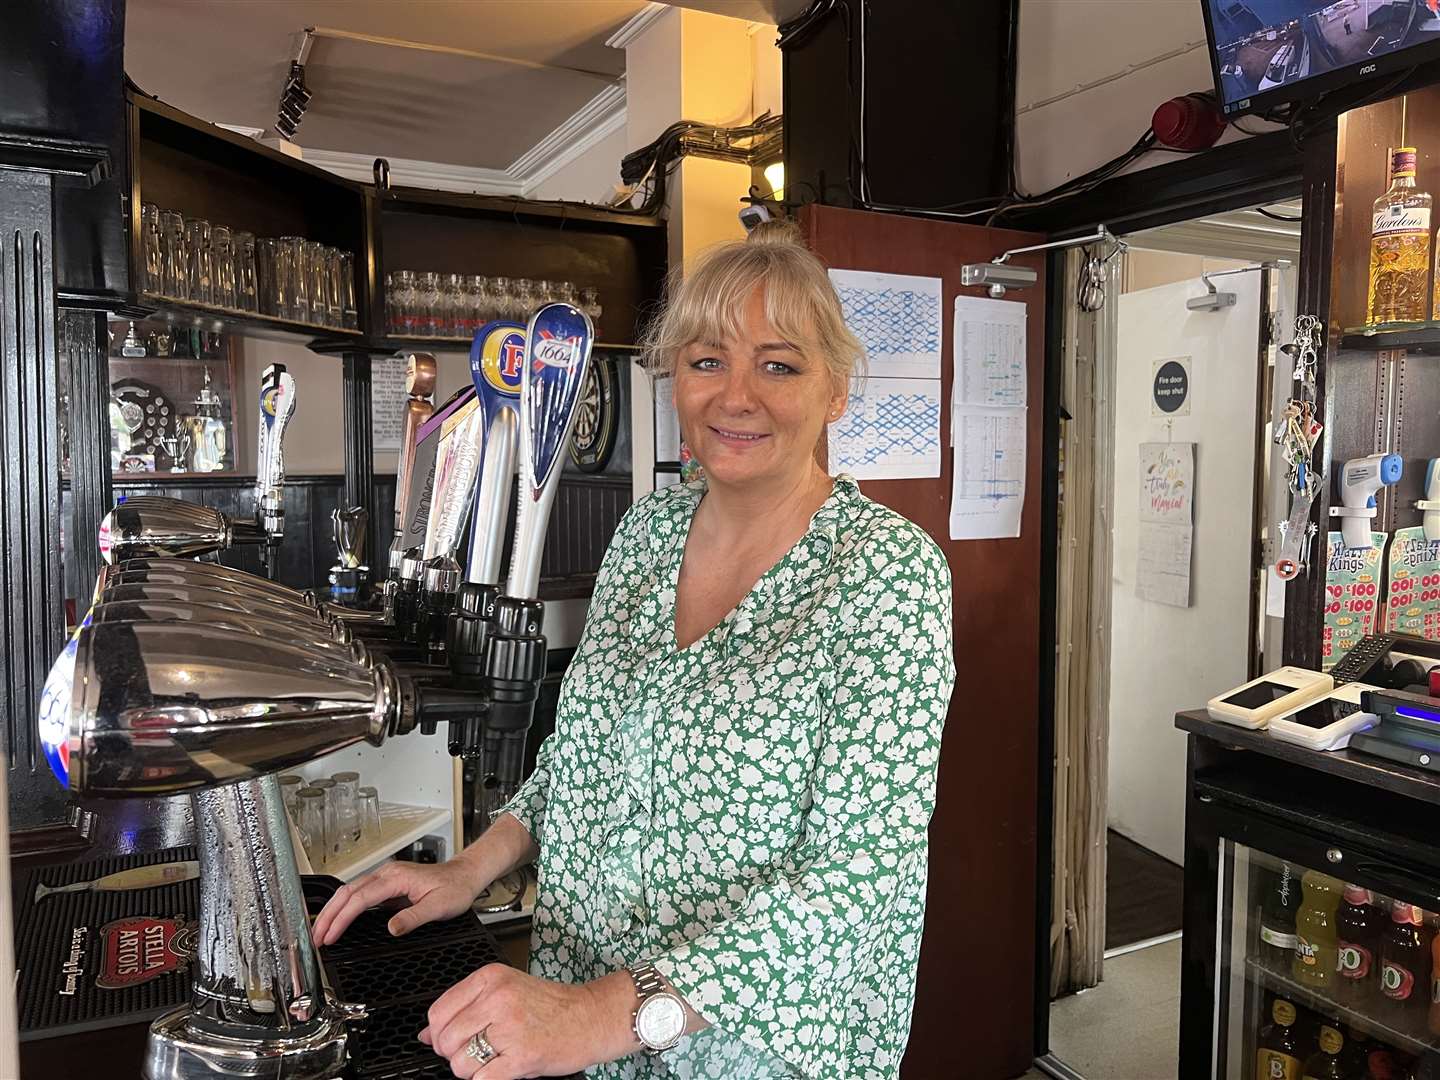 Jacqui Reed, a barmaid at The Pelham Arms, Perry Street